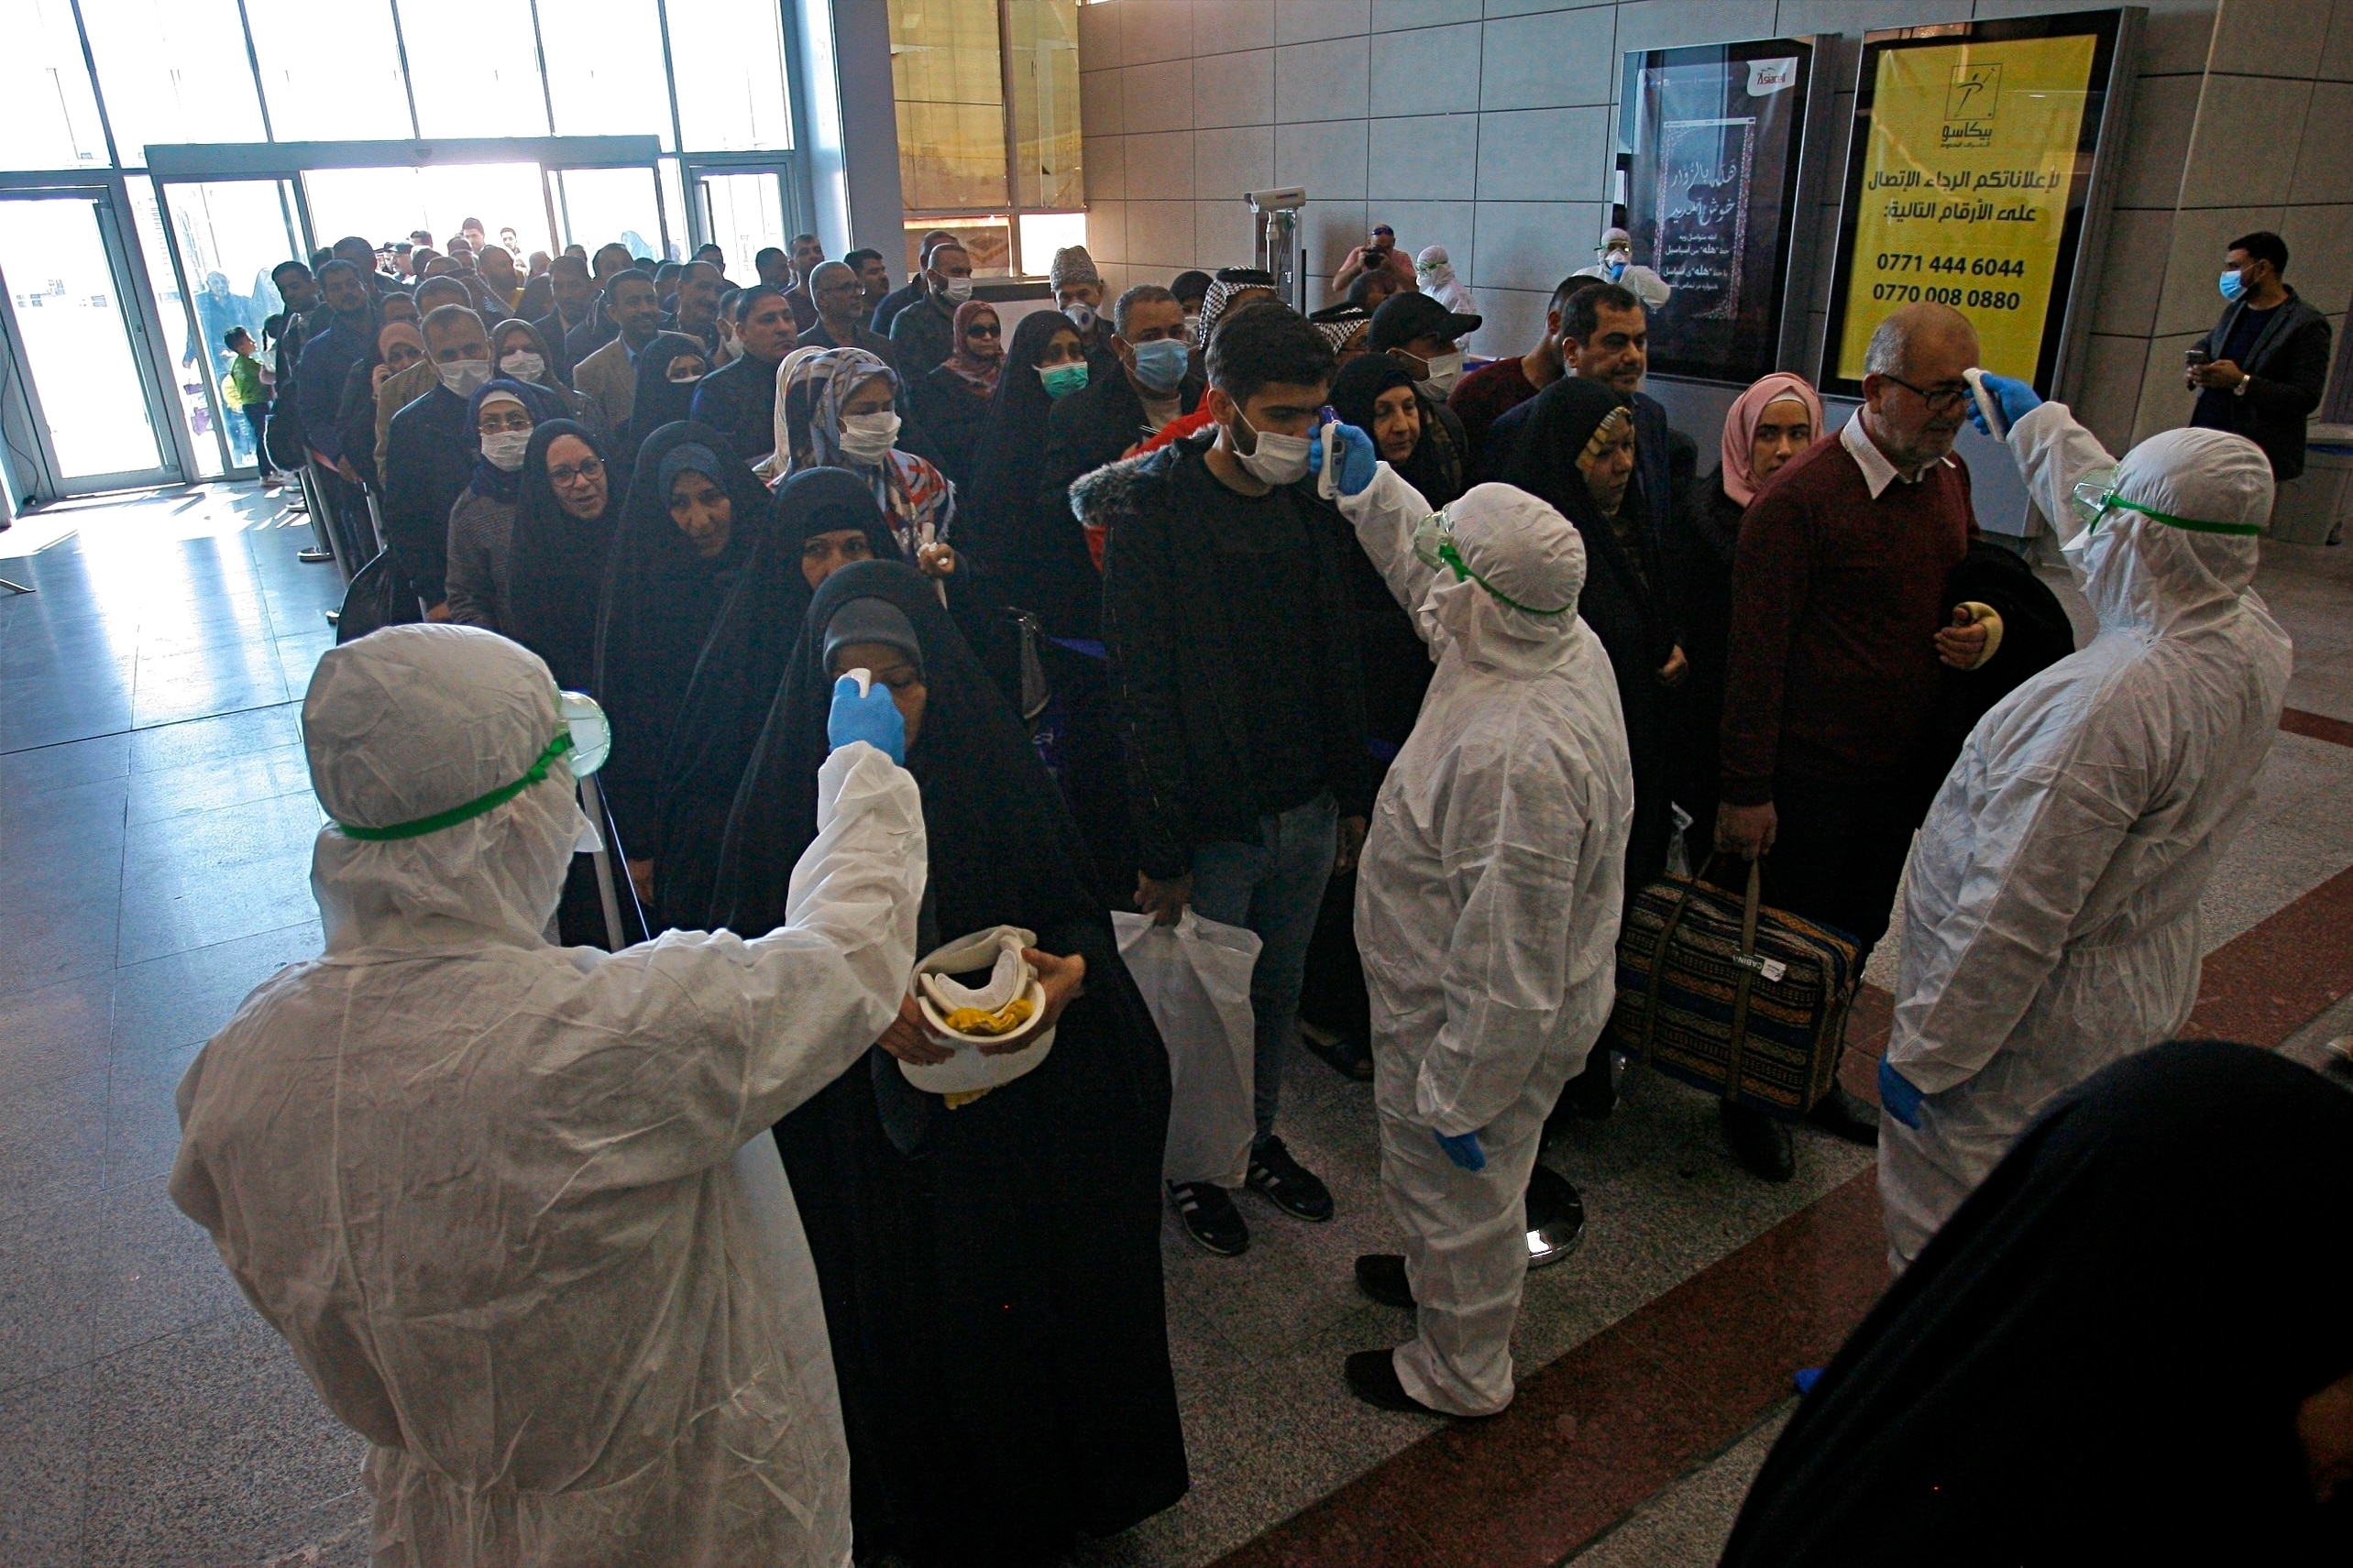 FILE - In this Friday, Feb. 21, 2020, file photo, medical staff check passengers arriving from Iran in the airport in Najaf, Iraq. Coronavirus-infected travelers from Iran already have been discovered in Lebanon and Canada. (AP Photo/Anmar Khalil, File)